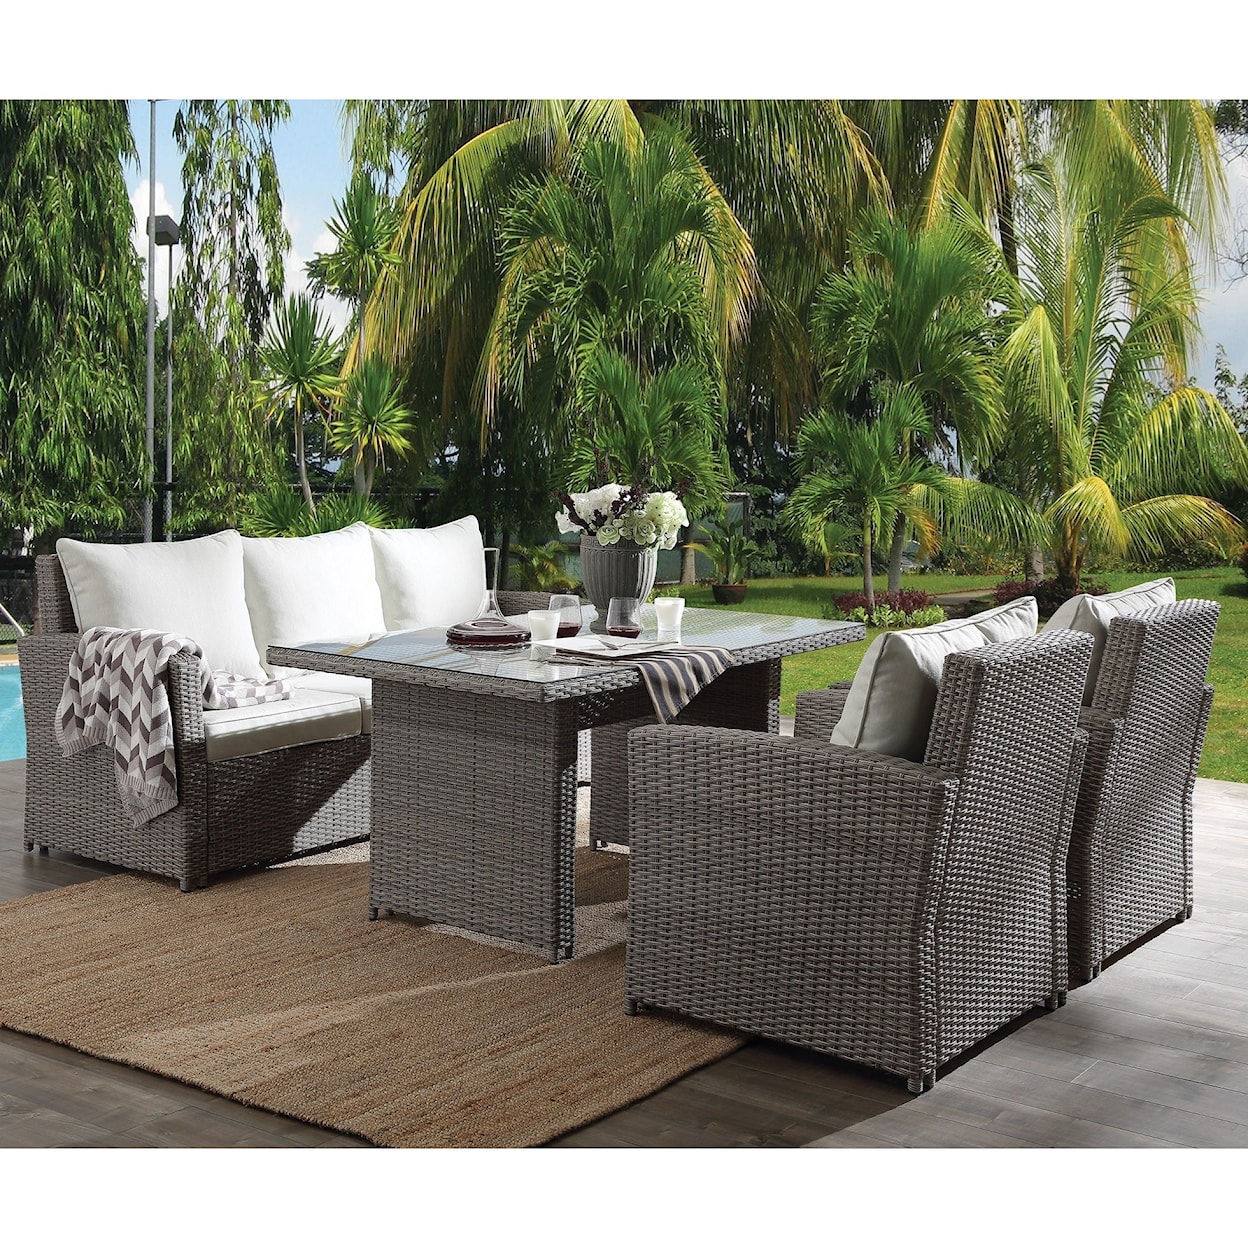 Acme Furniture Tahan Outdoor Dining Table